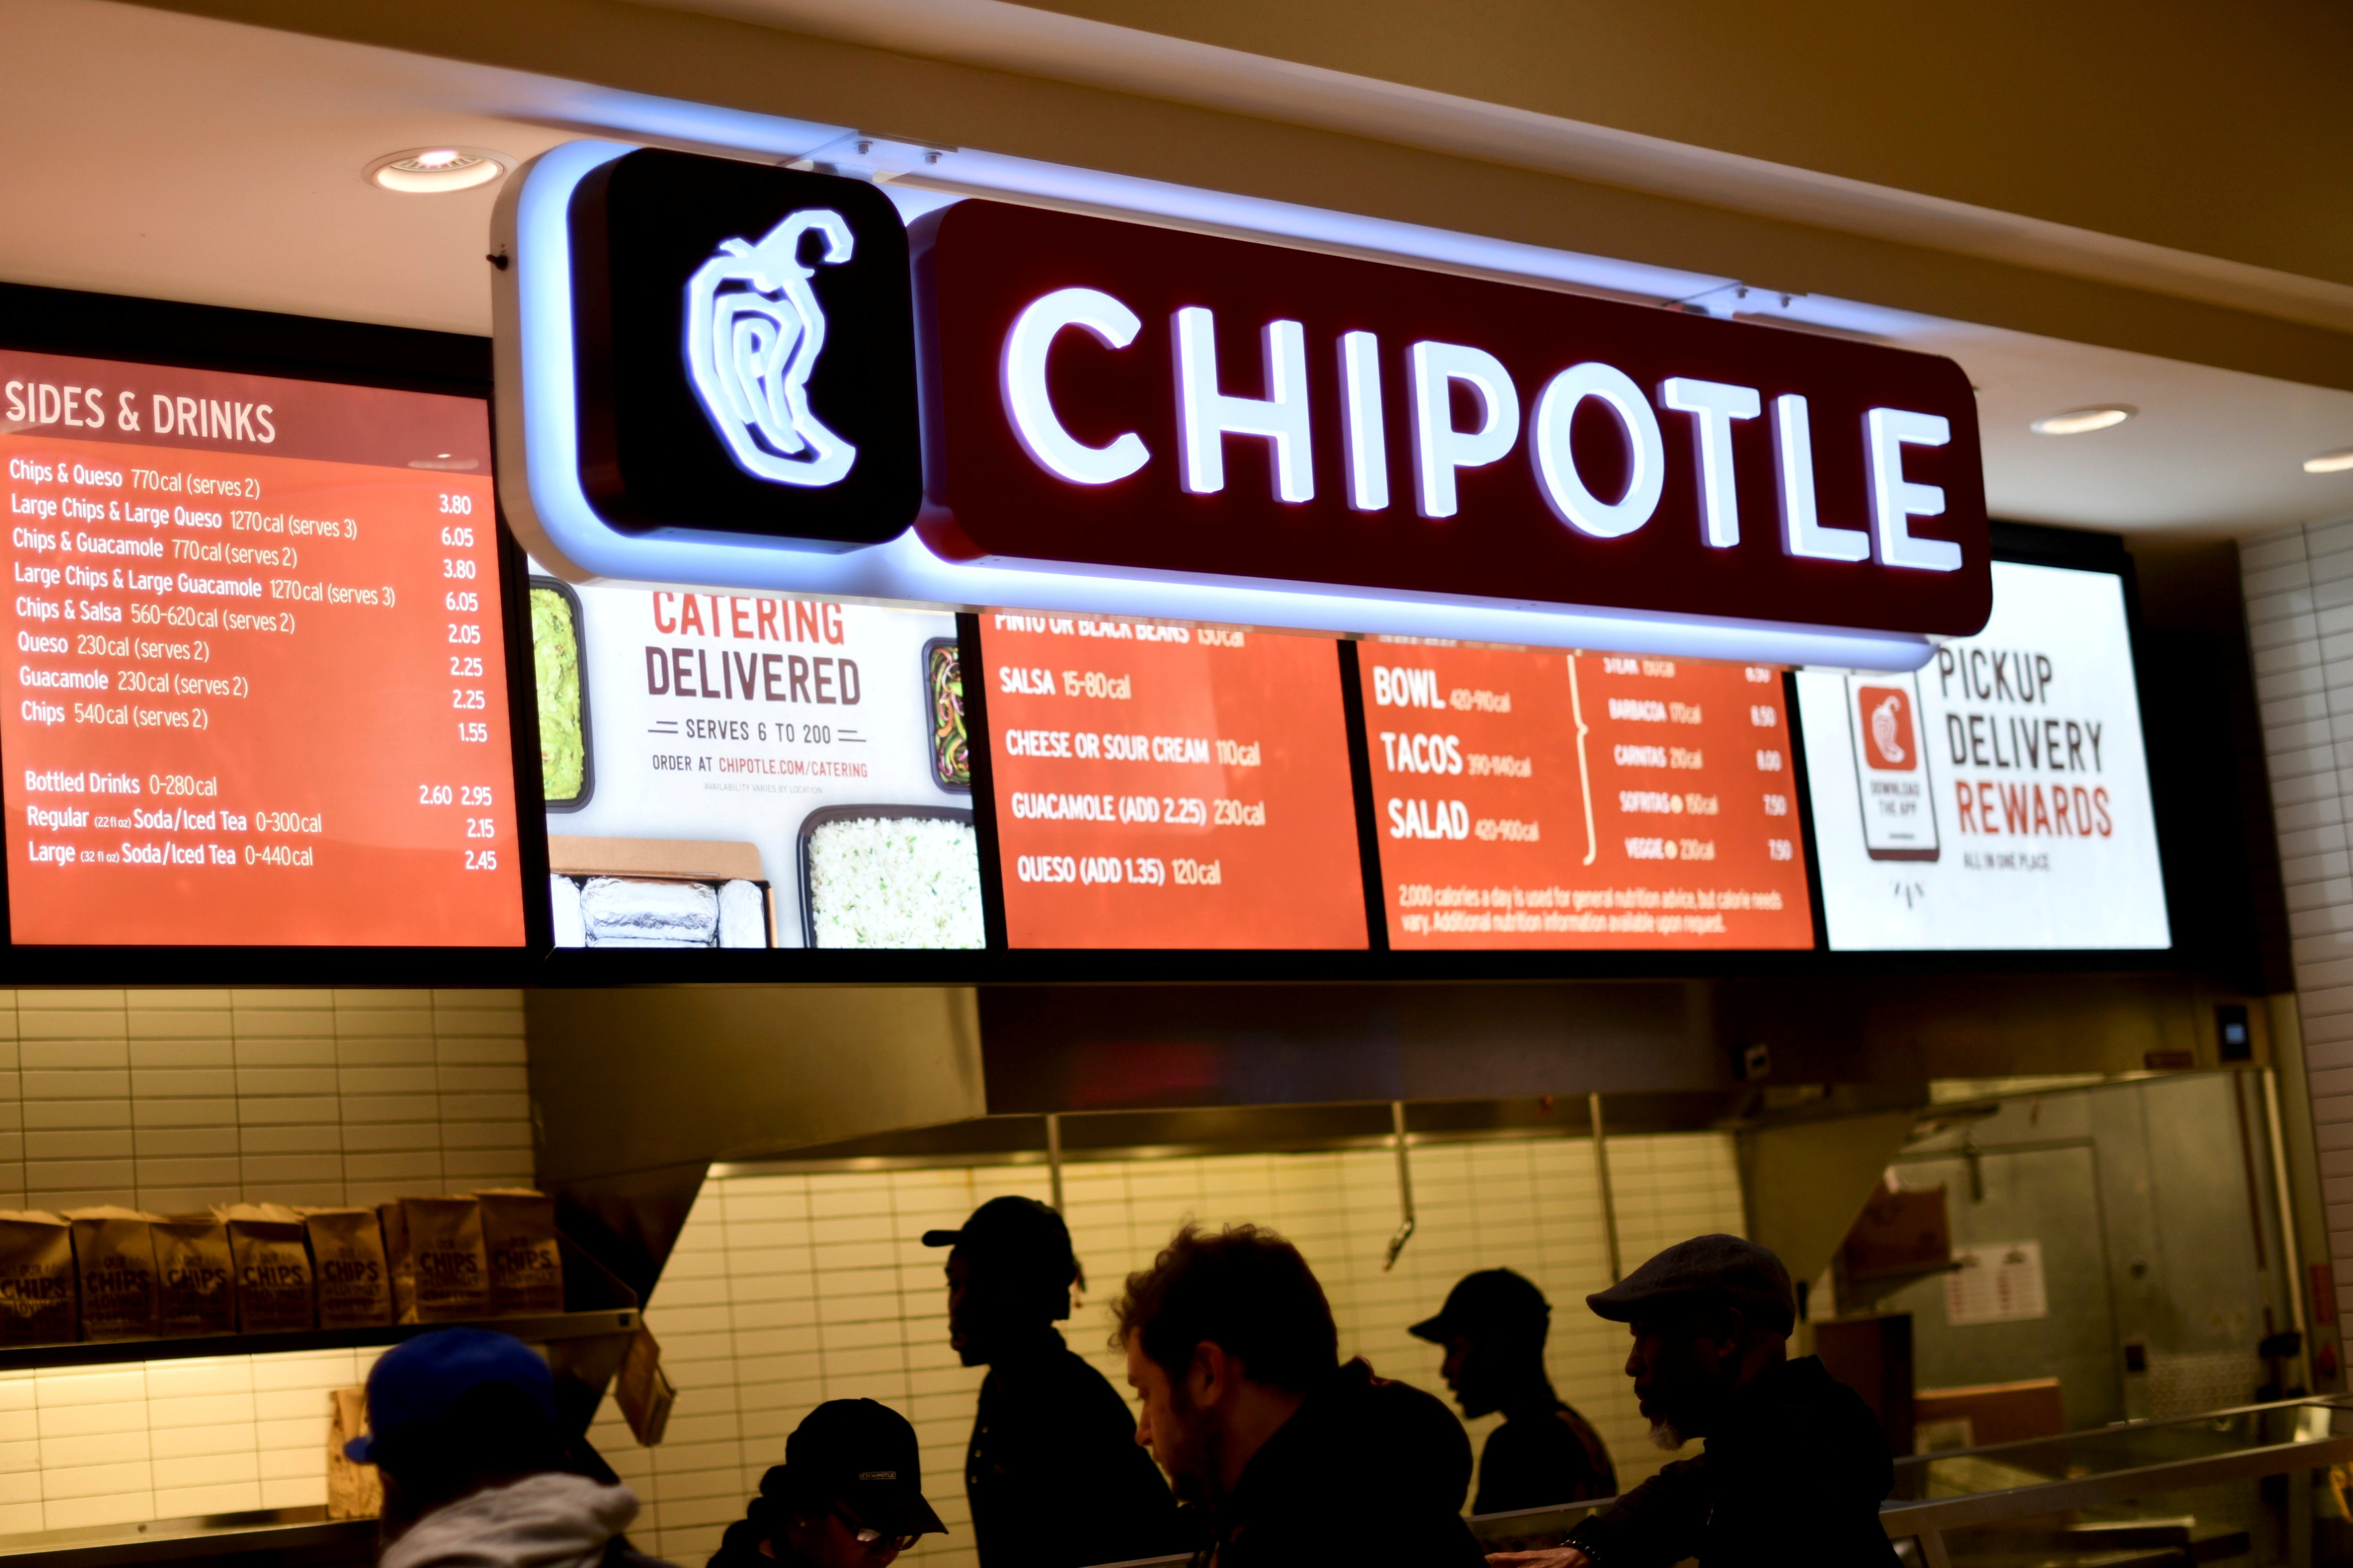 Customers order from a Chipotle restaurant at the King of Prussia Mall in King of Prussia